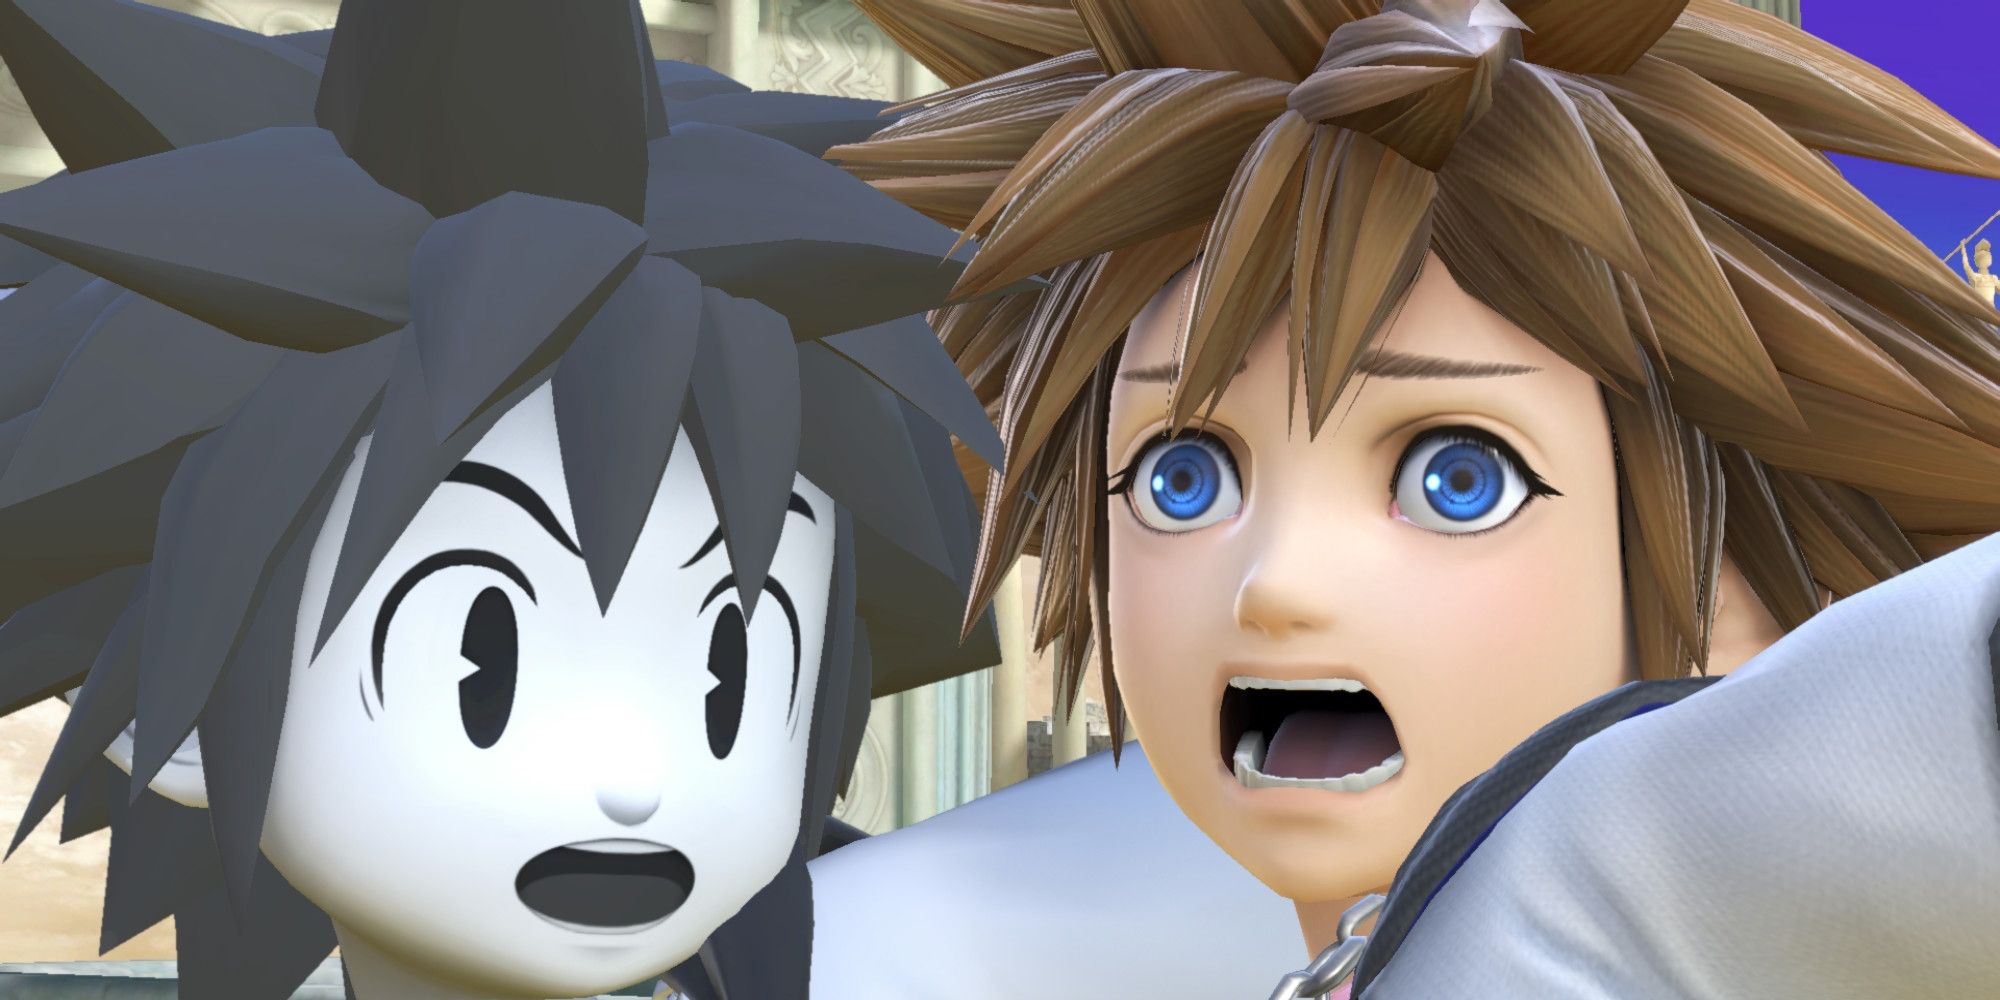 Sora Looks Unlikely To Get His Own Amiibo